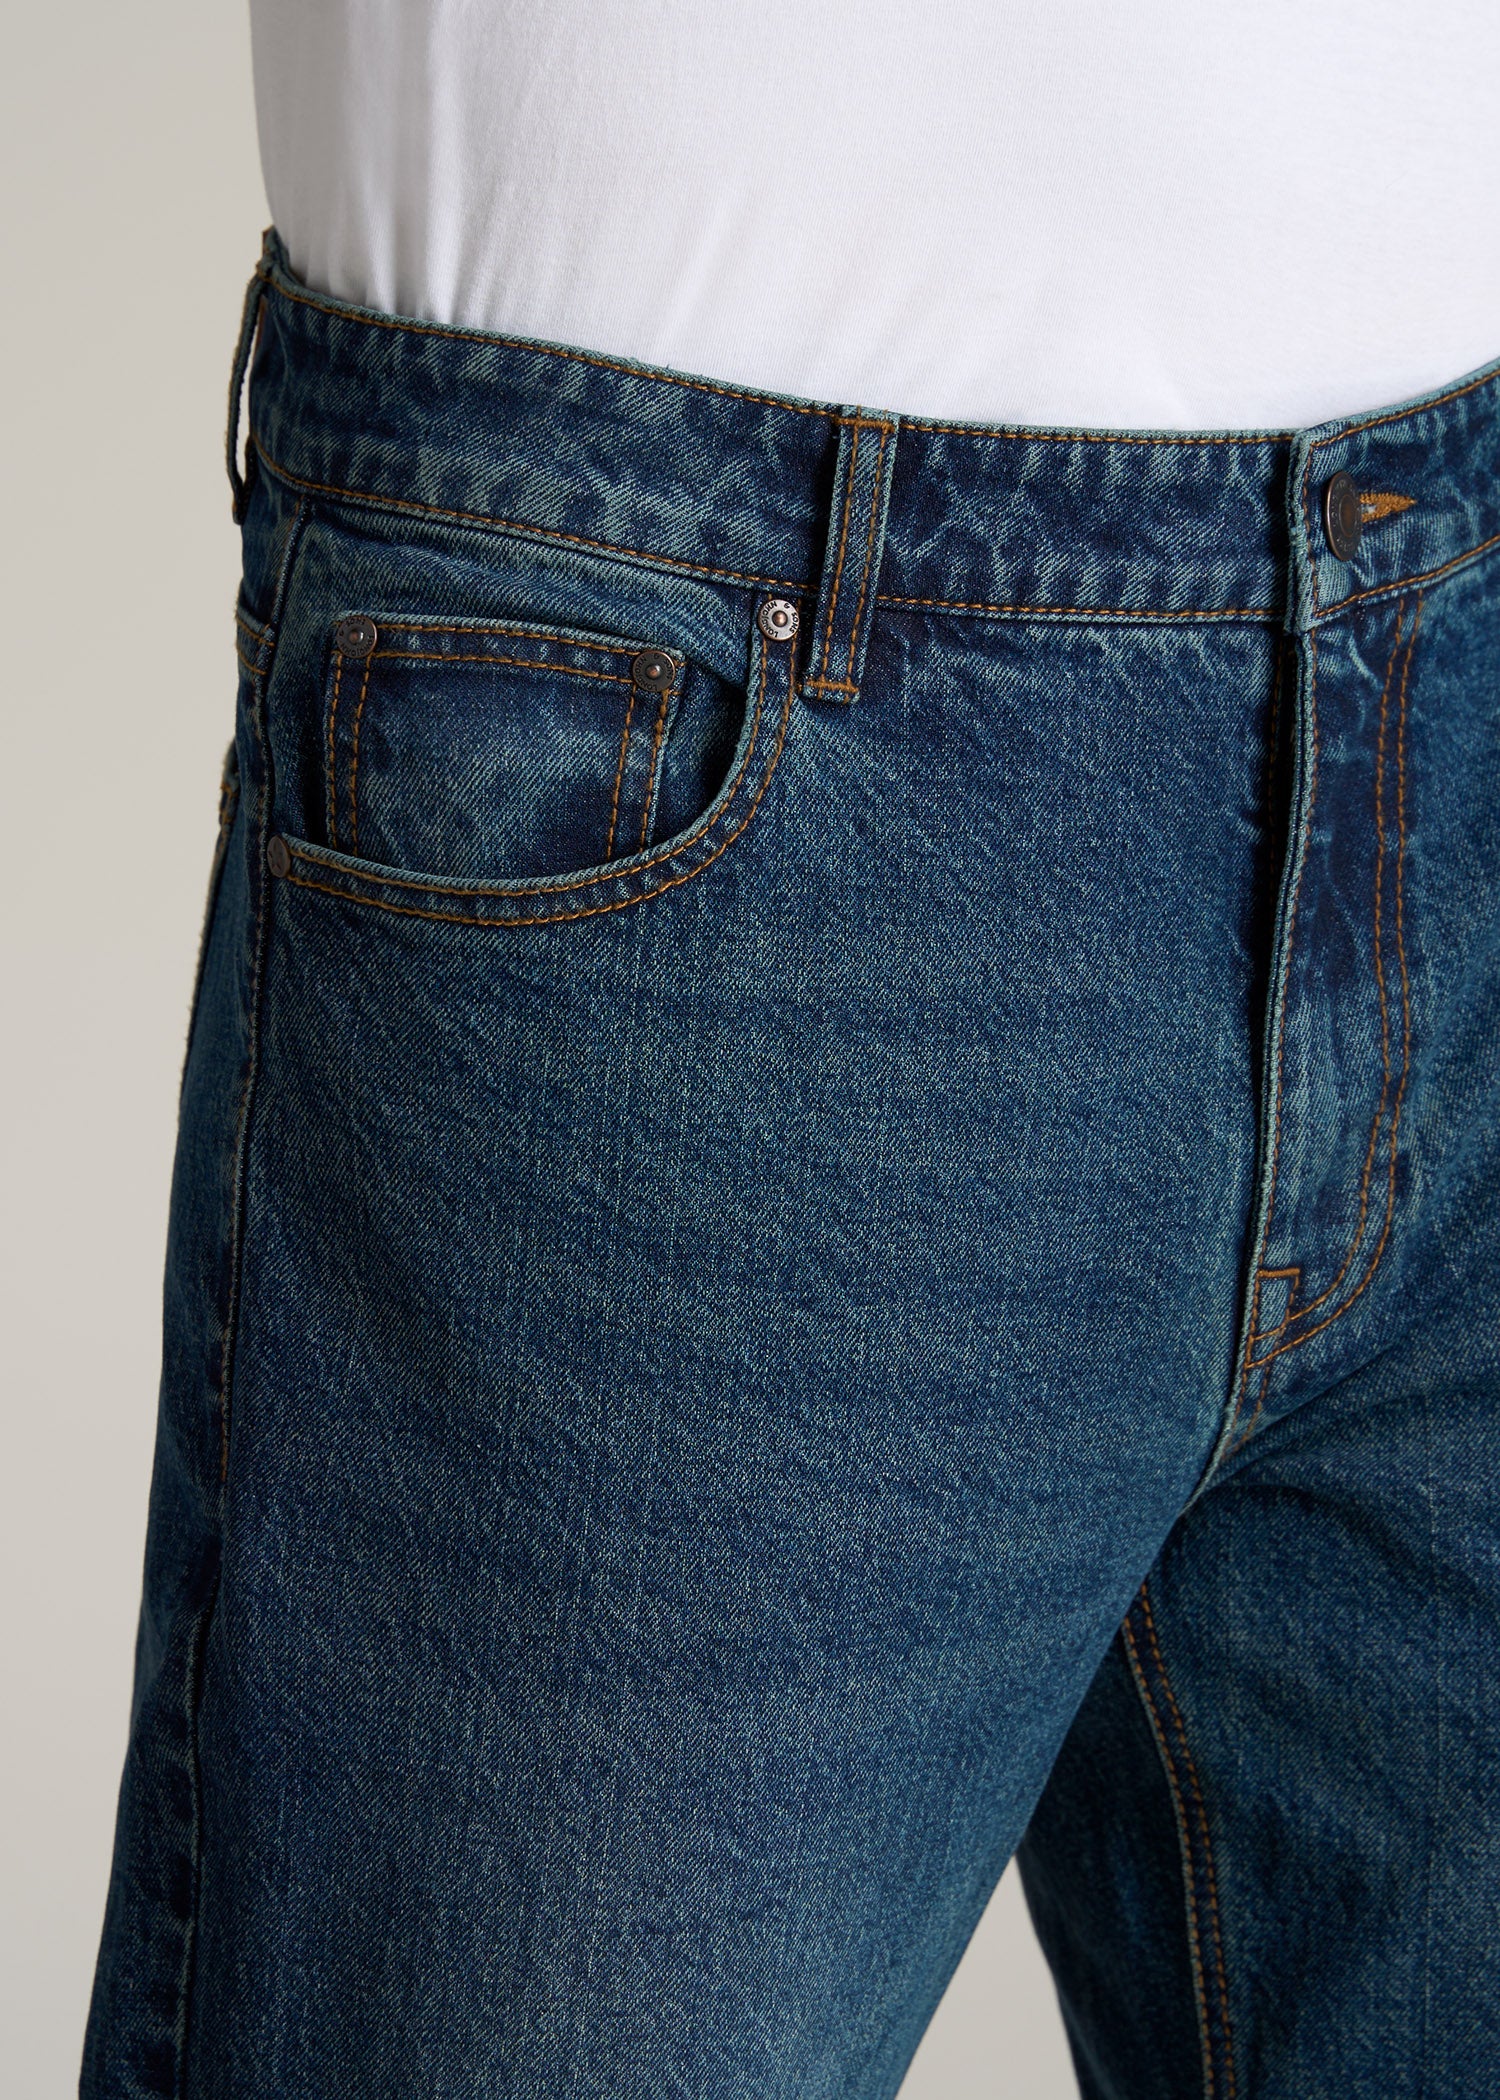 LJ&S STRAIGHT LEG Jeans for Tall Men in Charger Blue